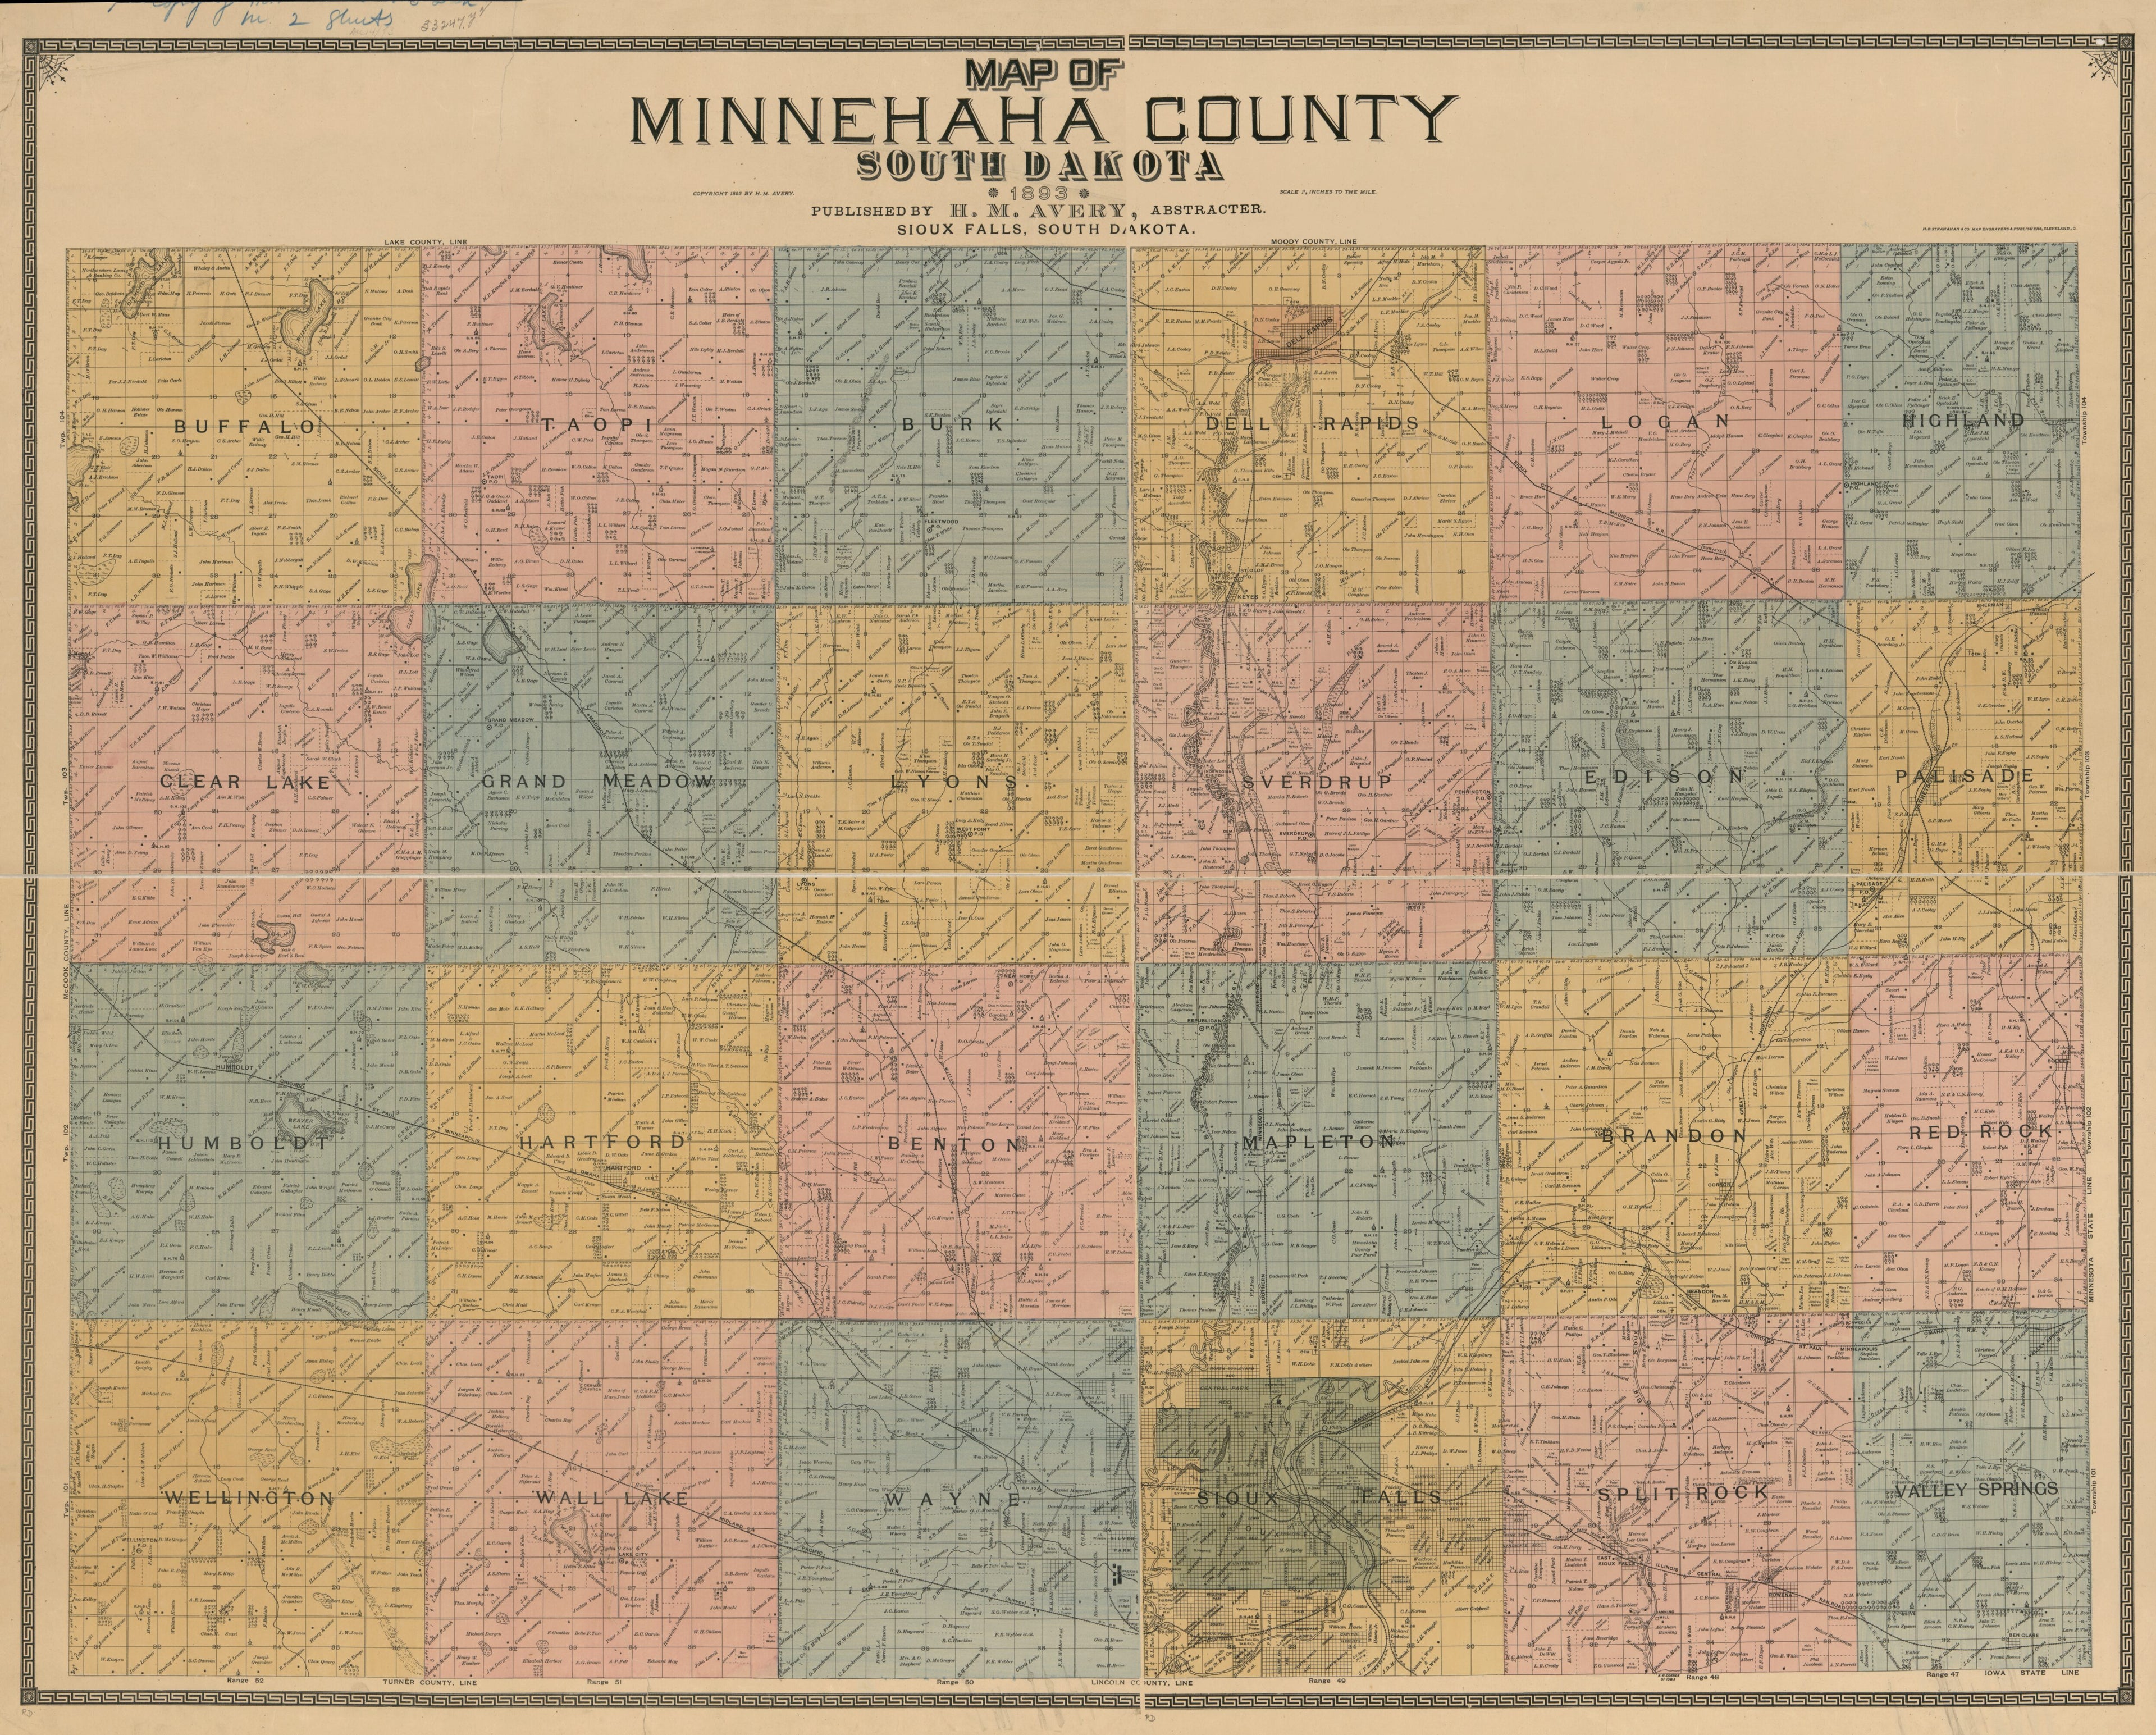 This old map of Map of Minnehaha County, South Dakota from 1893 was created by H. M. Avery,  H.B. Stranahan &amp; Co in 1893